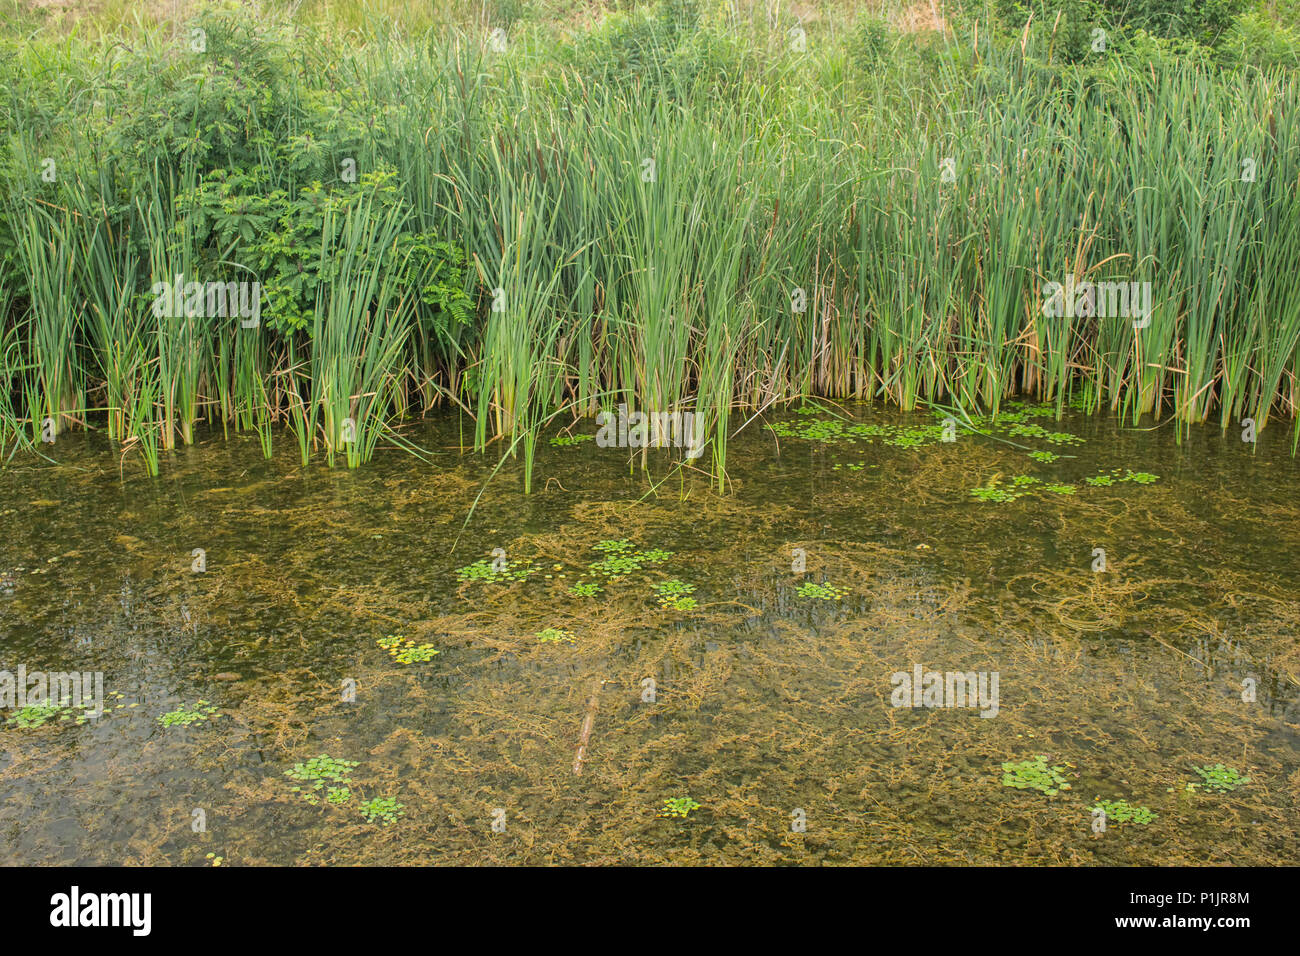 Vegetation of broadleaf cattail / Typha angustifolia by the water with Trapa natans Stock Photo